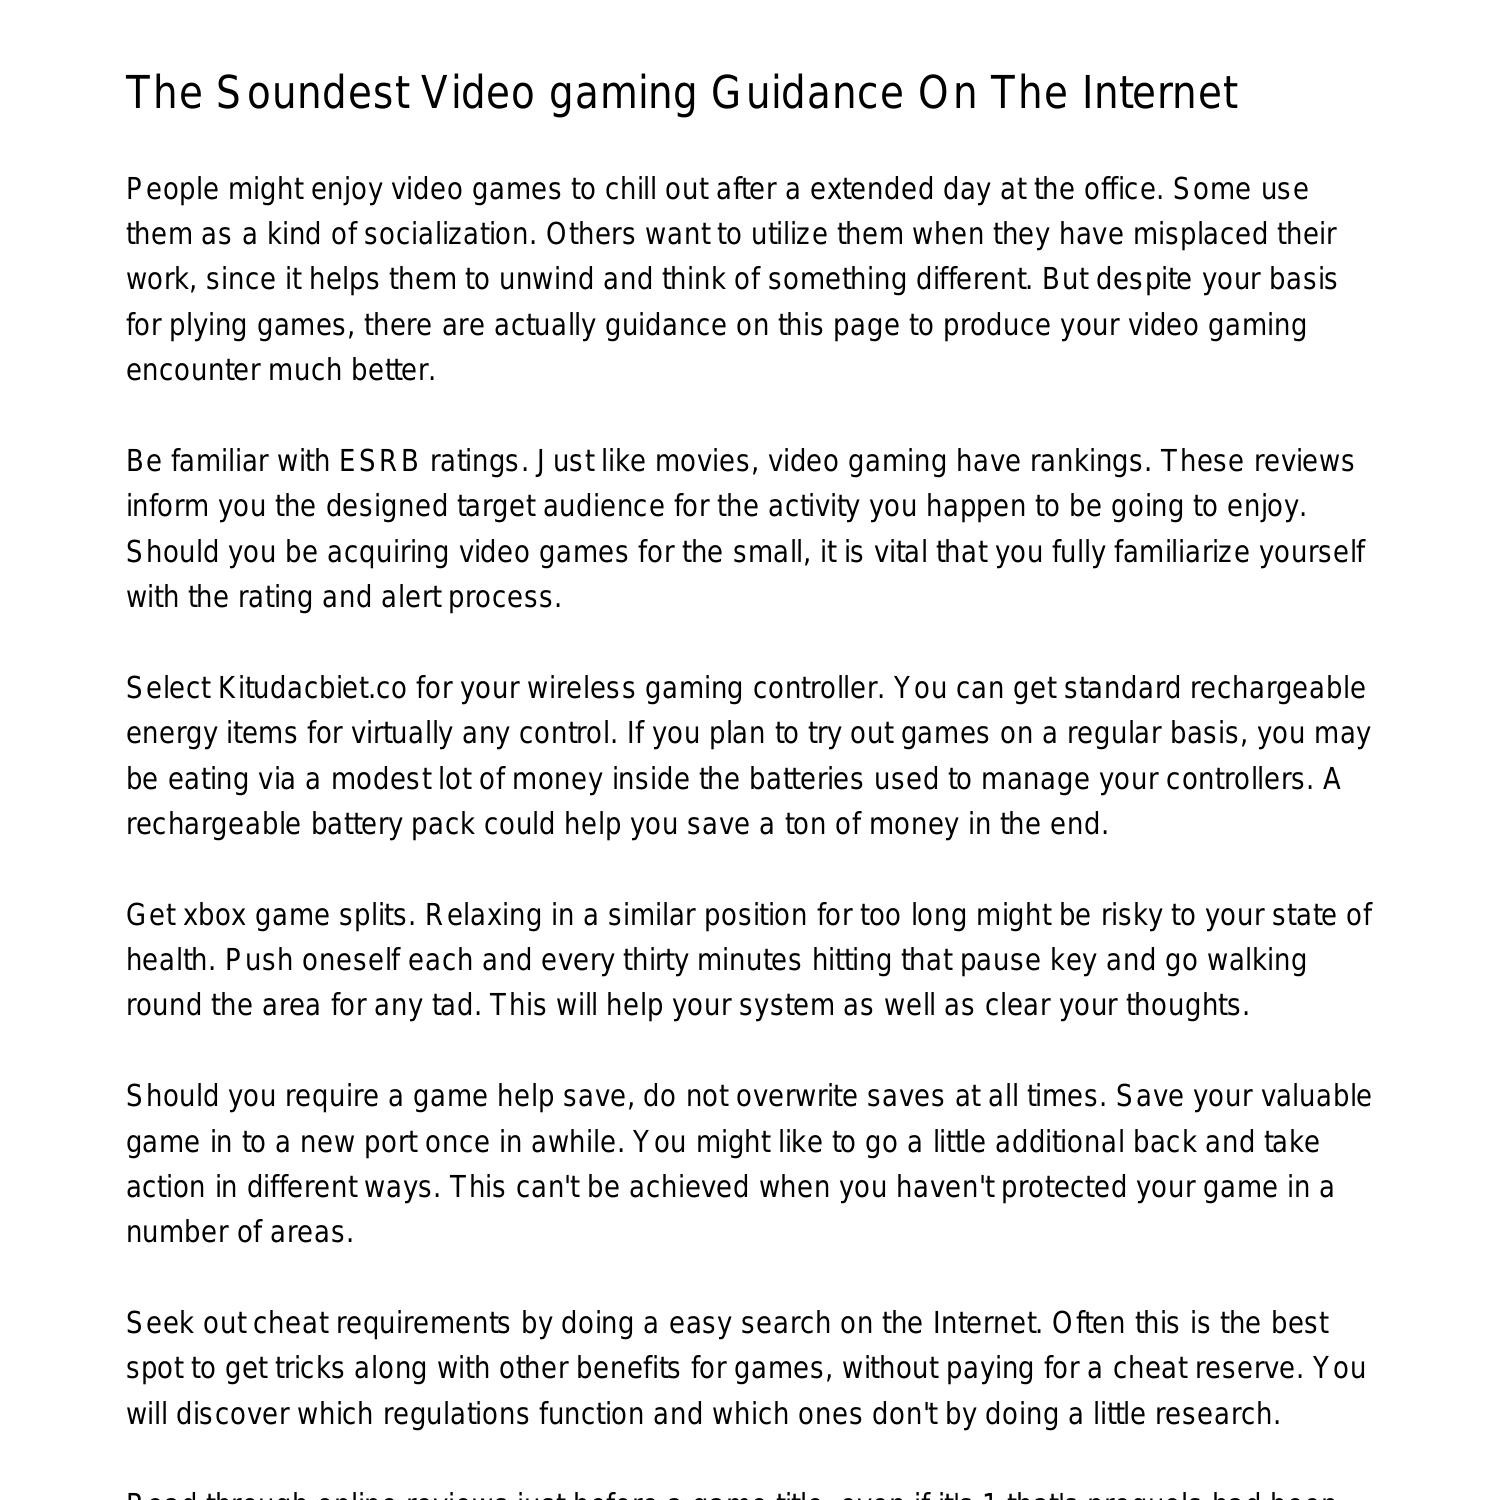 PDF) The Benefits of Playing Video Games